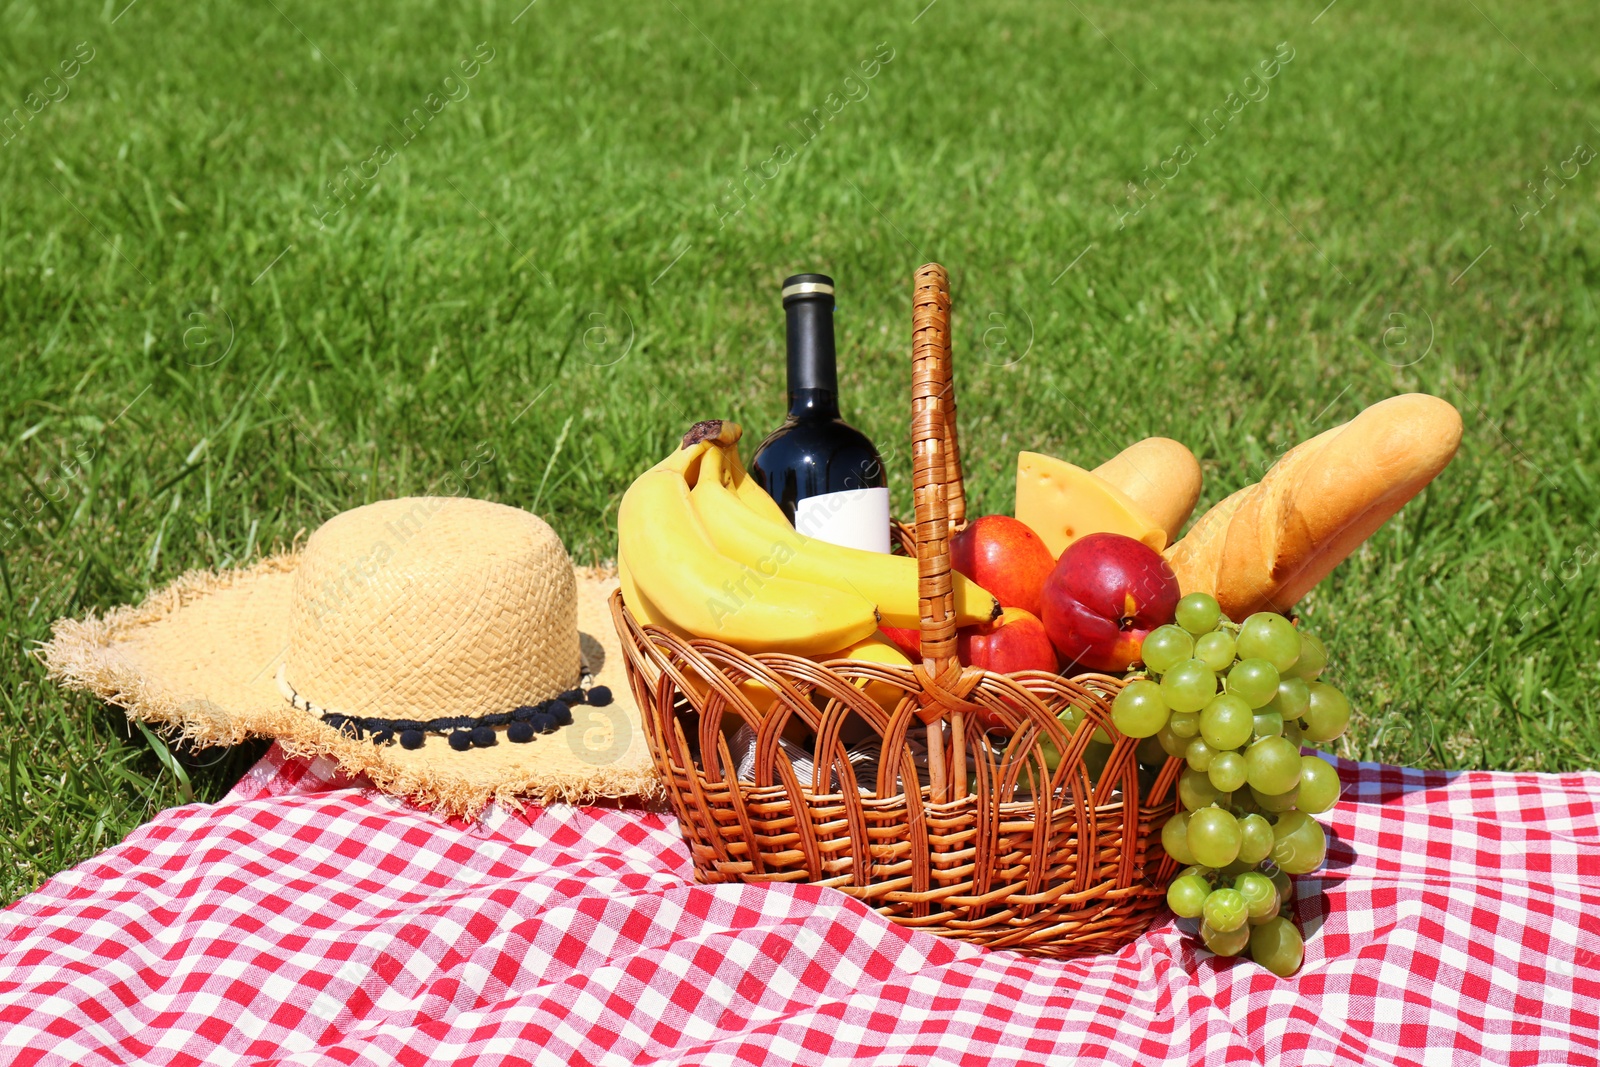 Photo of Basket with food on blanket prepared for picnic in park